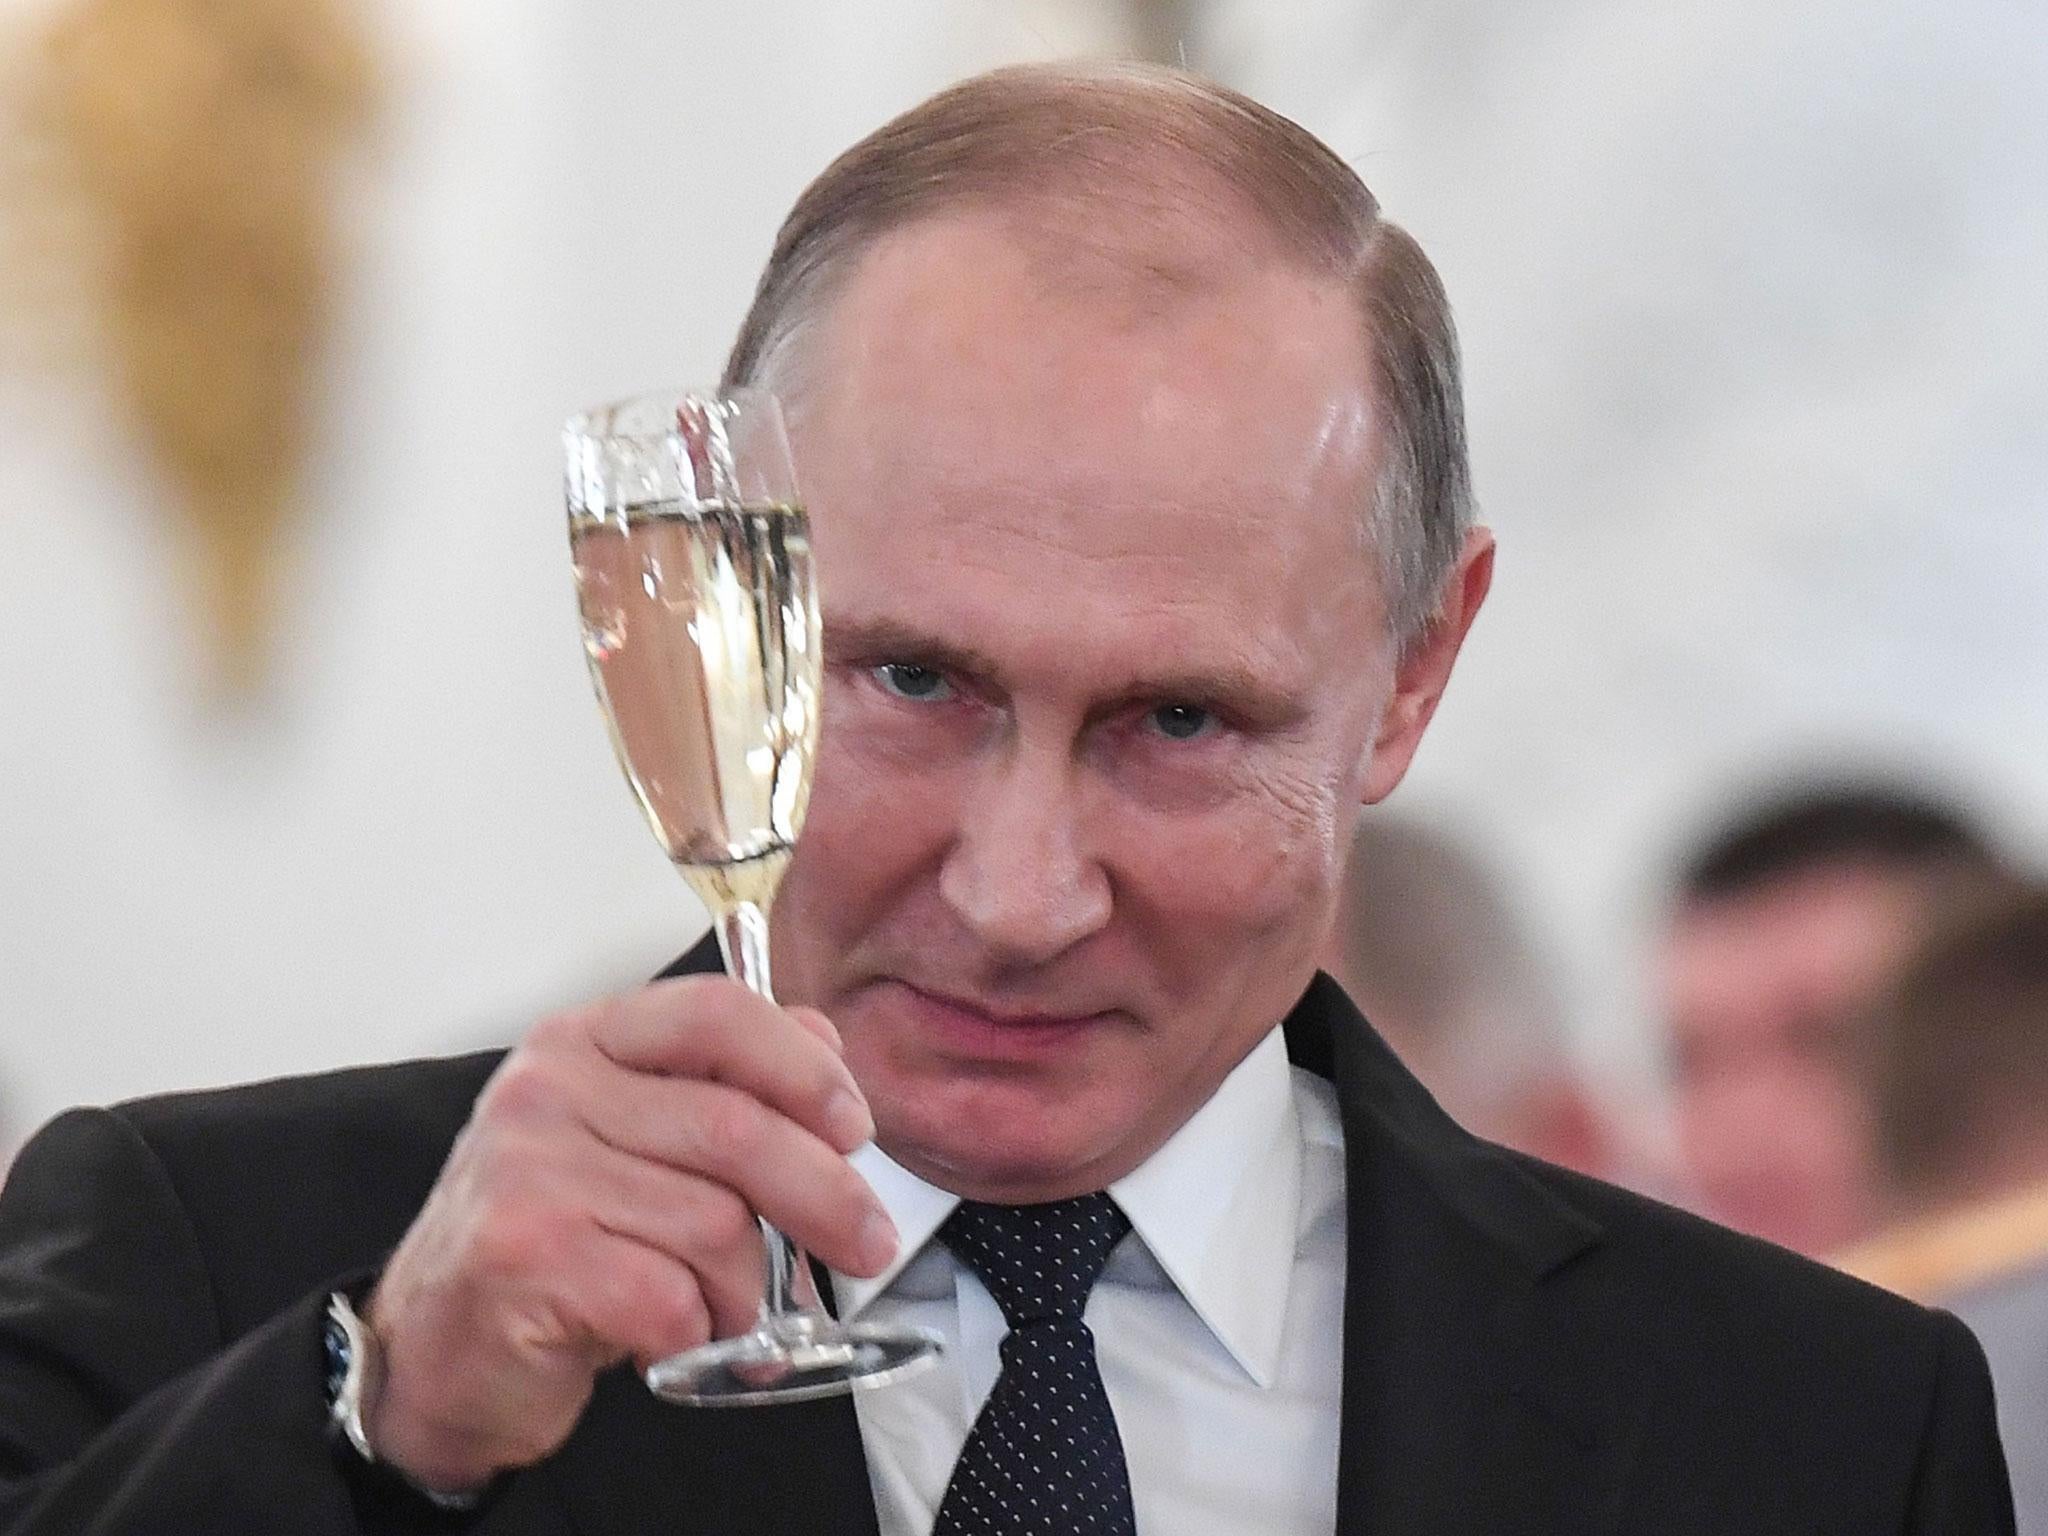 Vladimir Putin is likely to overwhelmingly win re-election as Russia's President